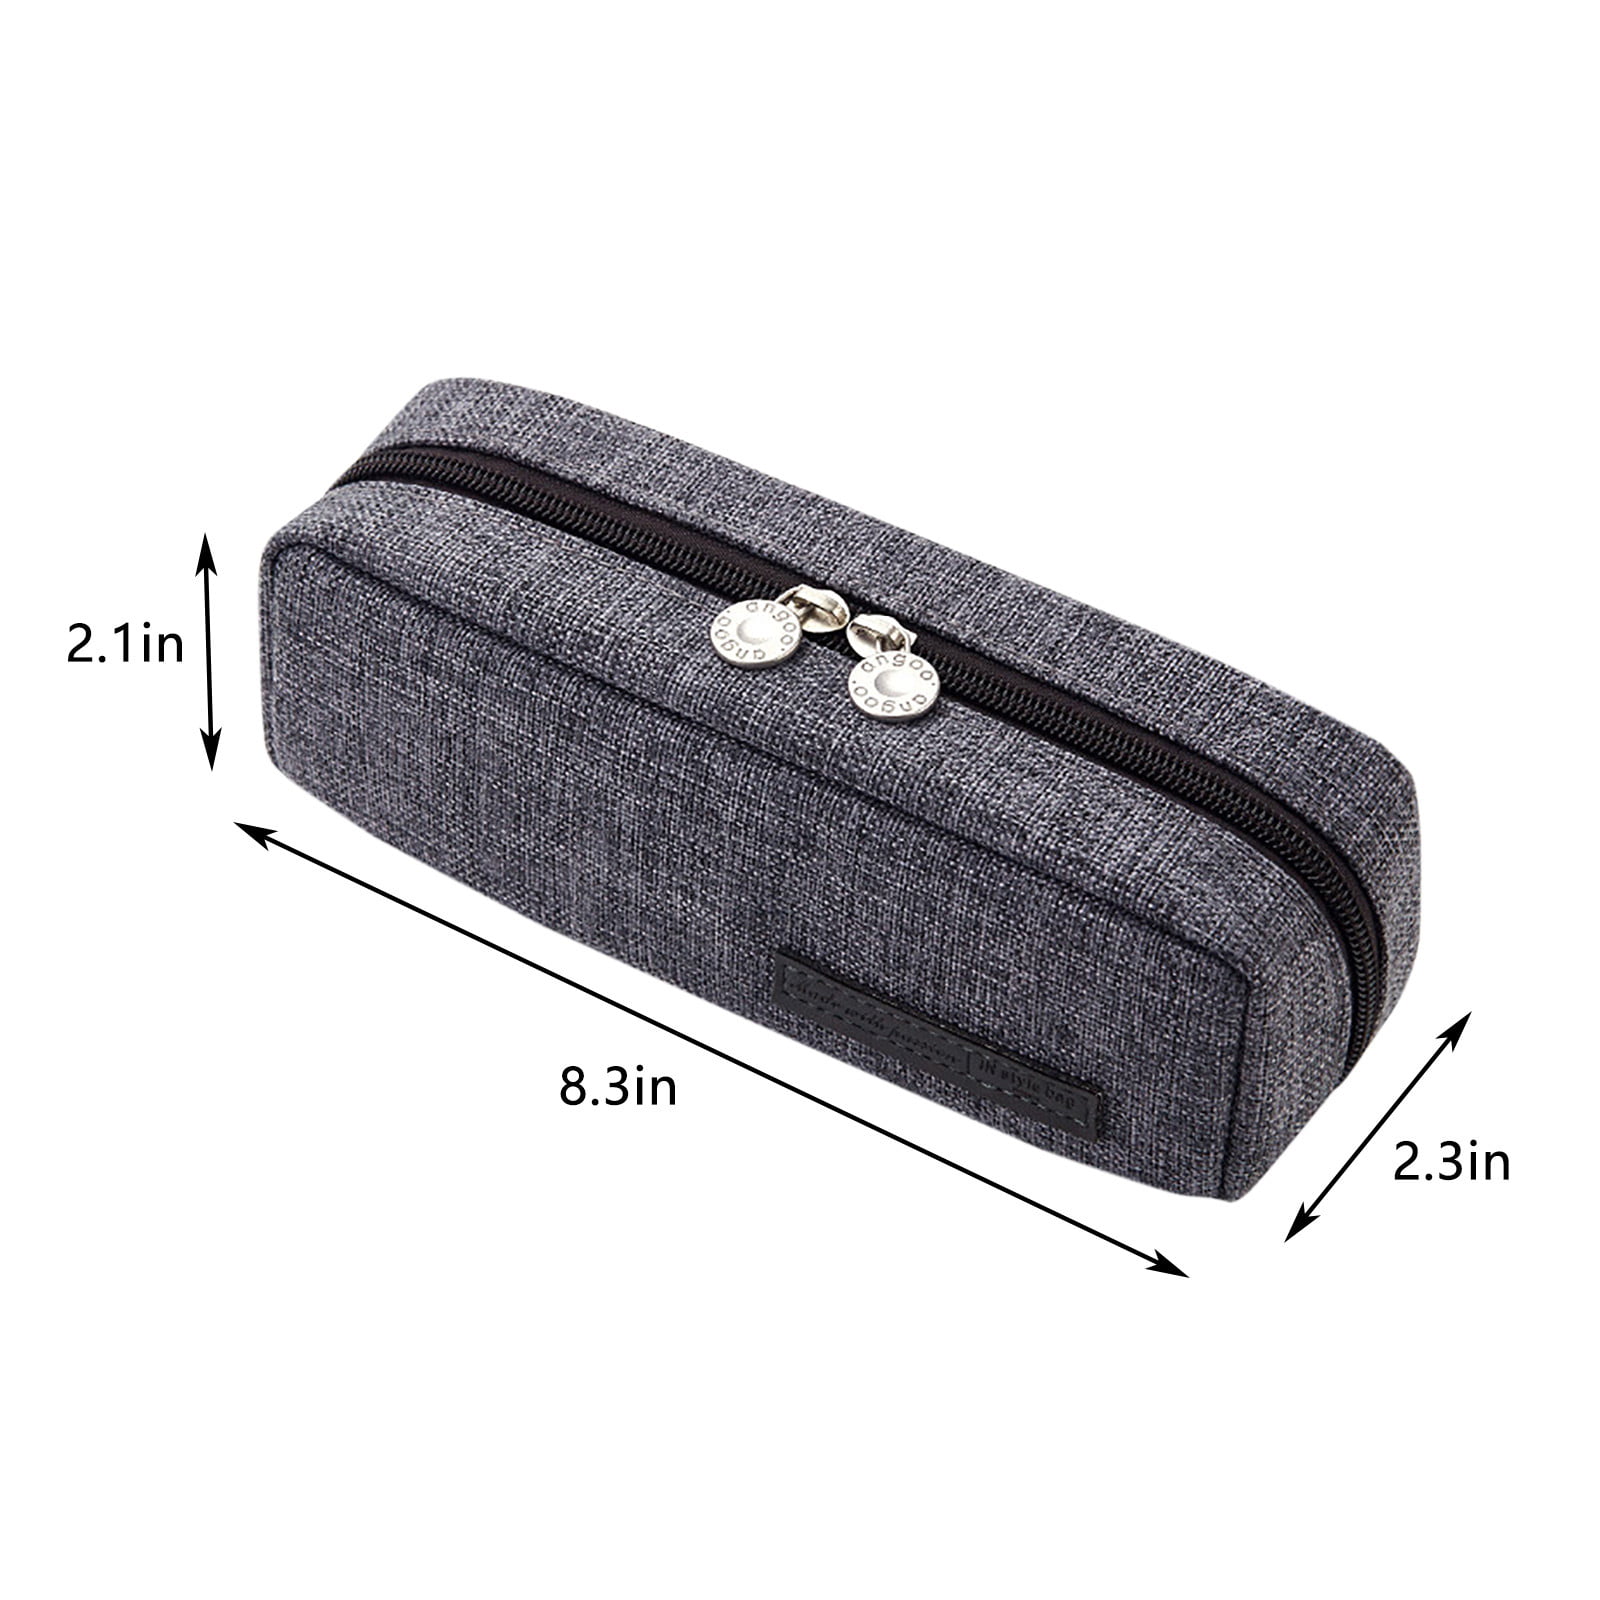 Autrucker Big Capacity Pencil Case 3 Compartments Canvas Bag Multifunctional Marker Pen Pouch Holder Durable Portable Large Storage Bag for Kids Teens Student